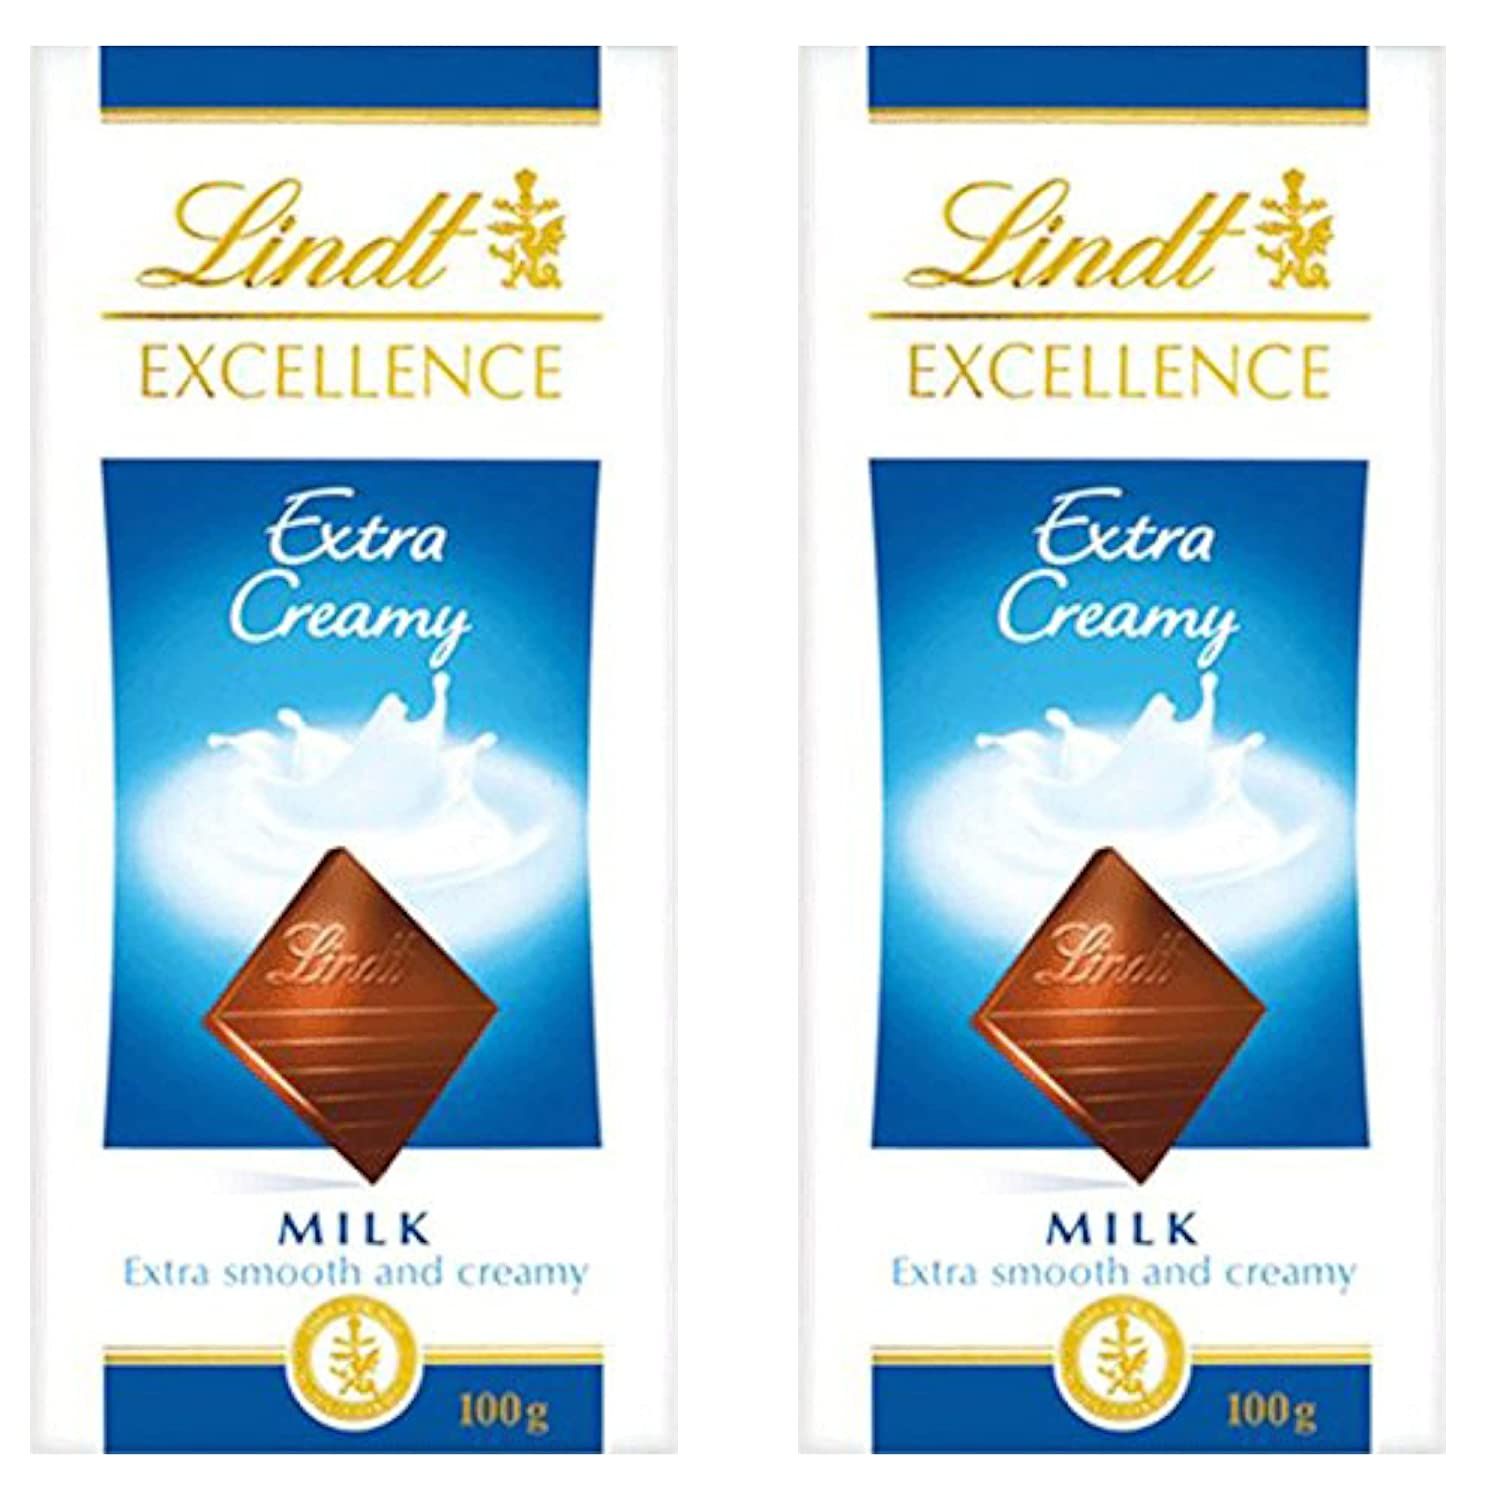 Lindt Excellence Extra Creamy Milk Image